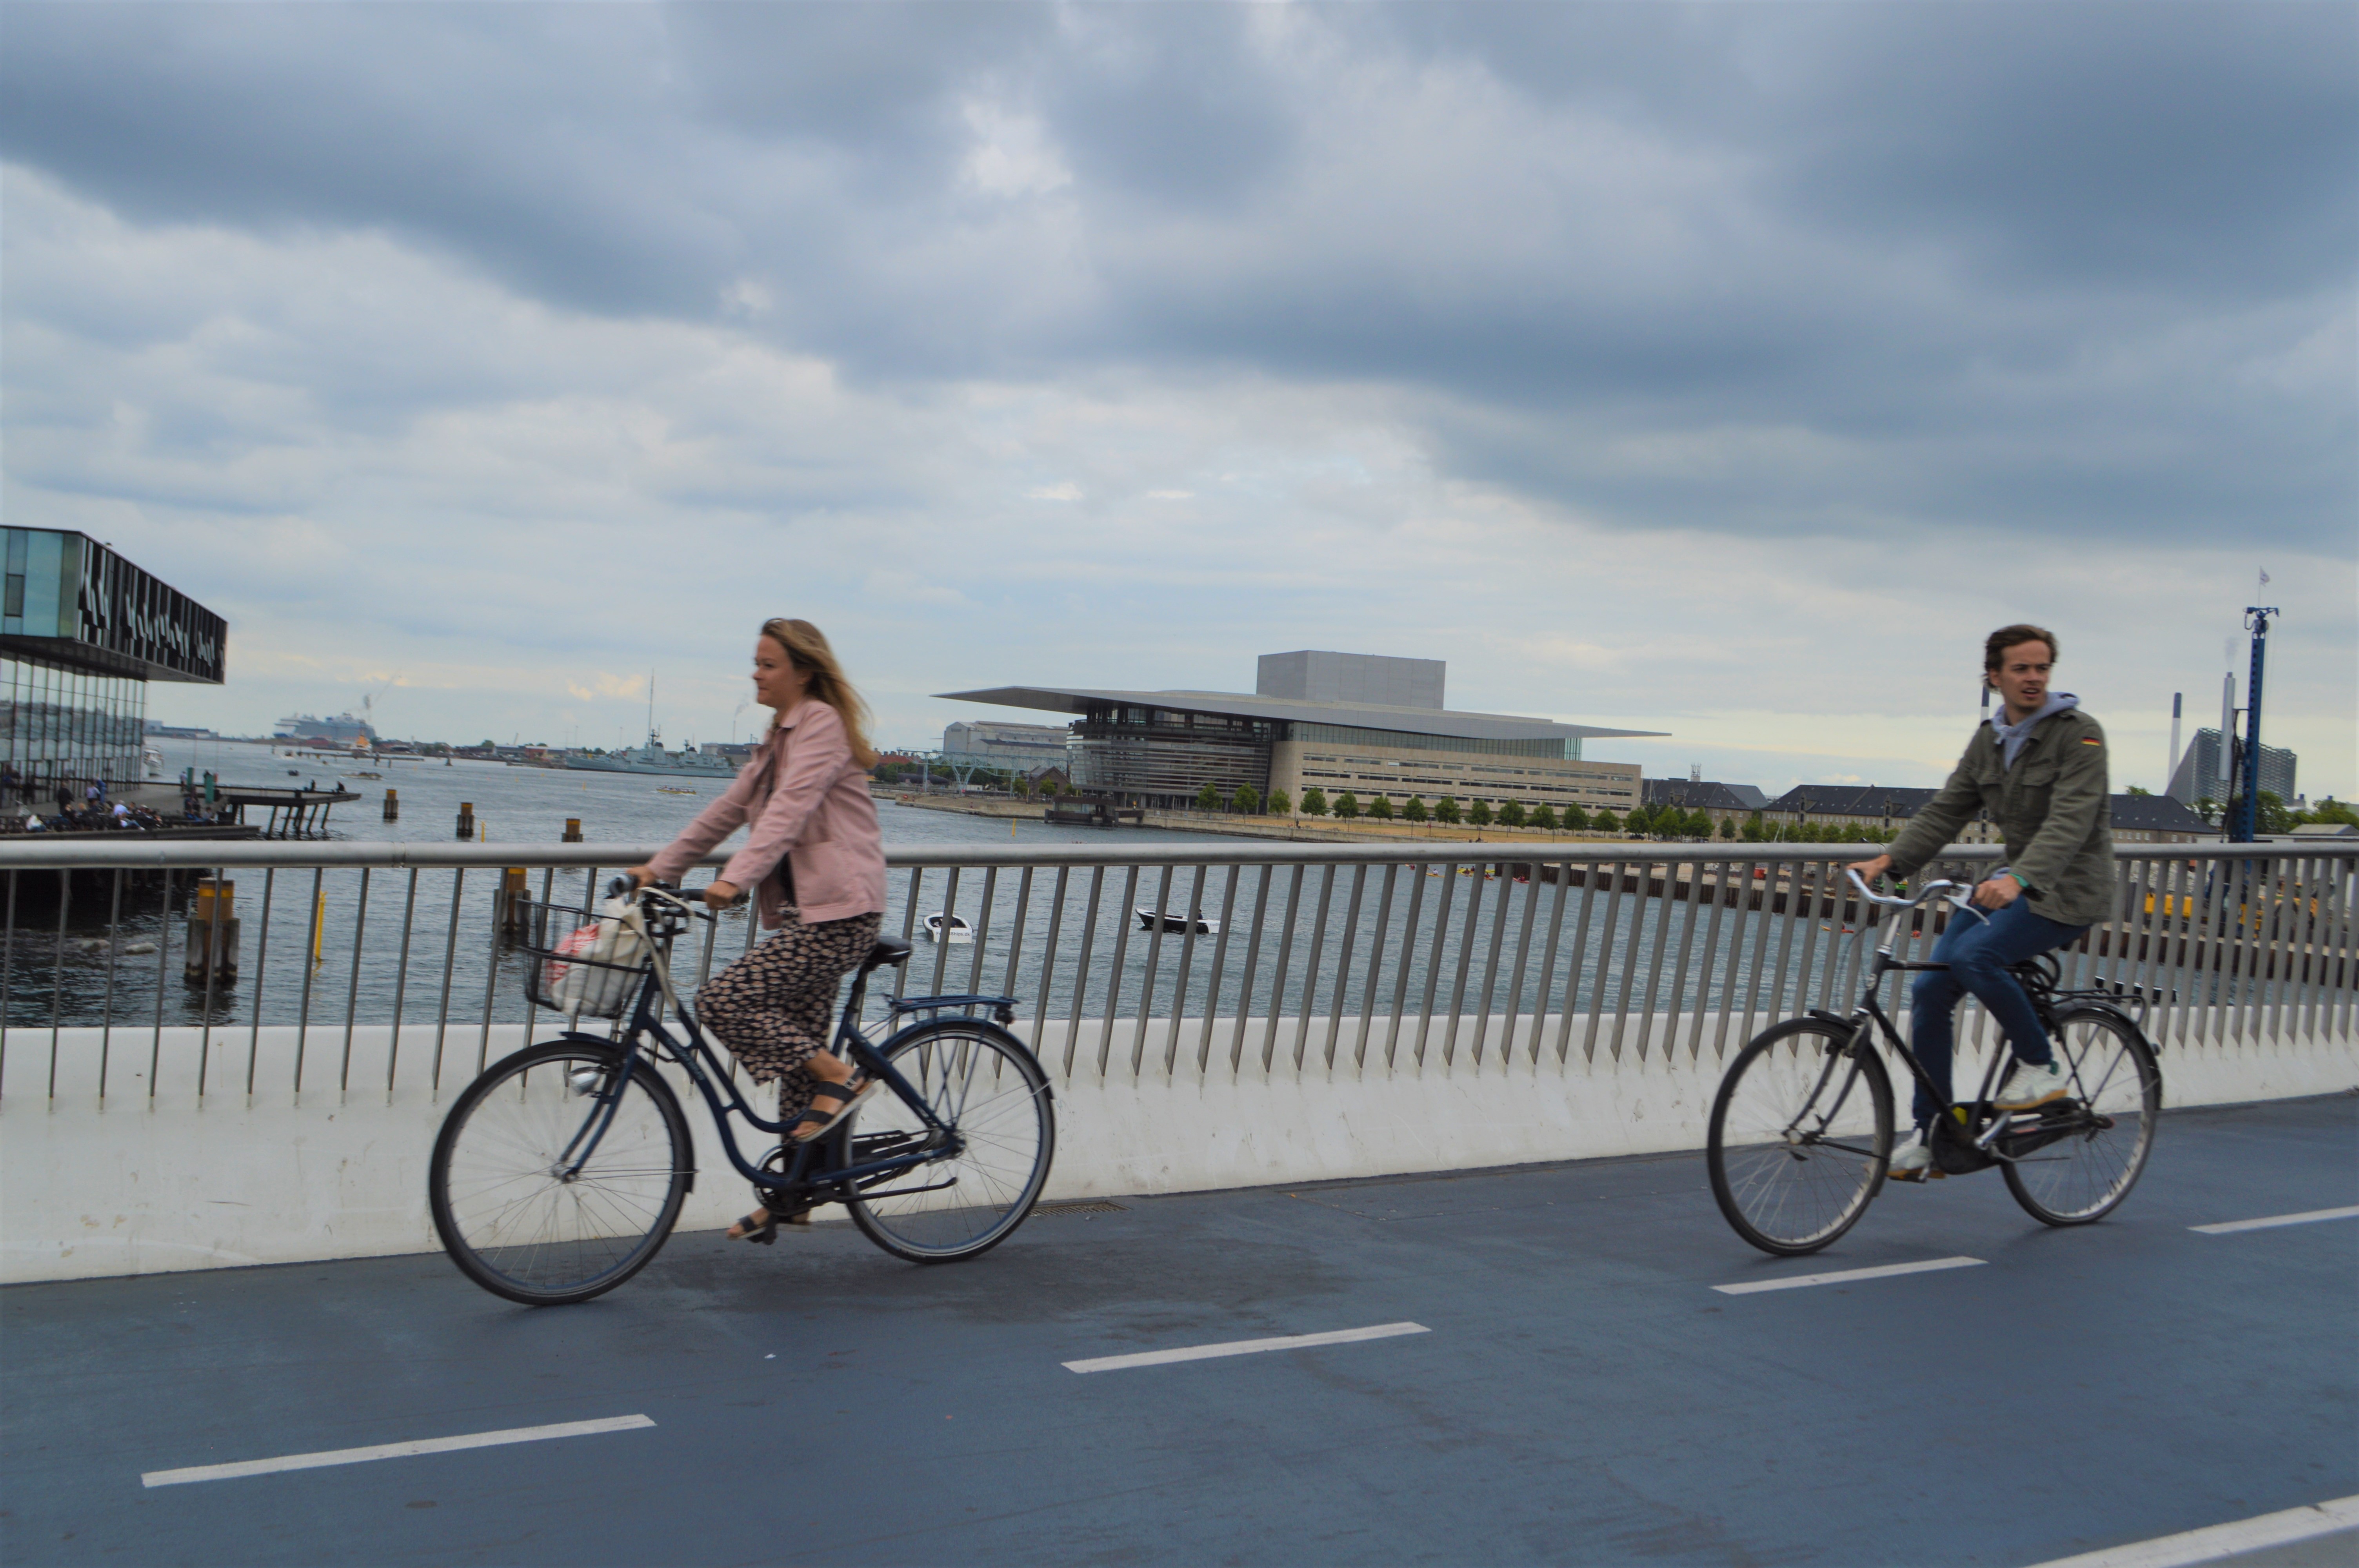 a group of people riding bicycles on a bridge